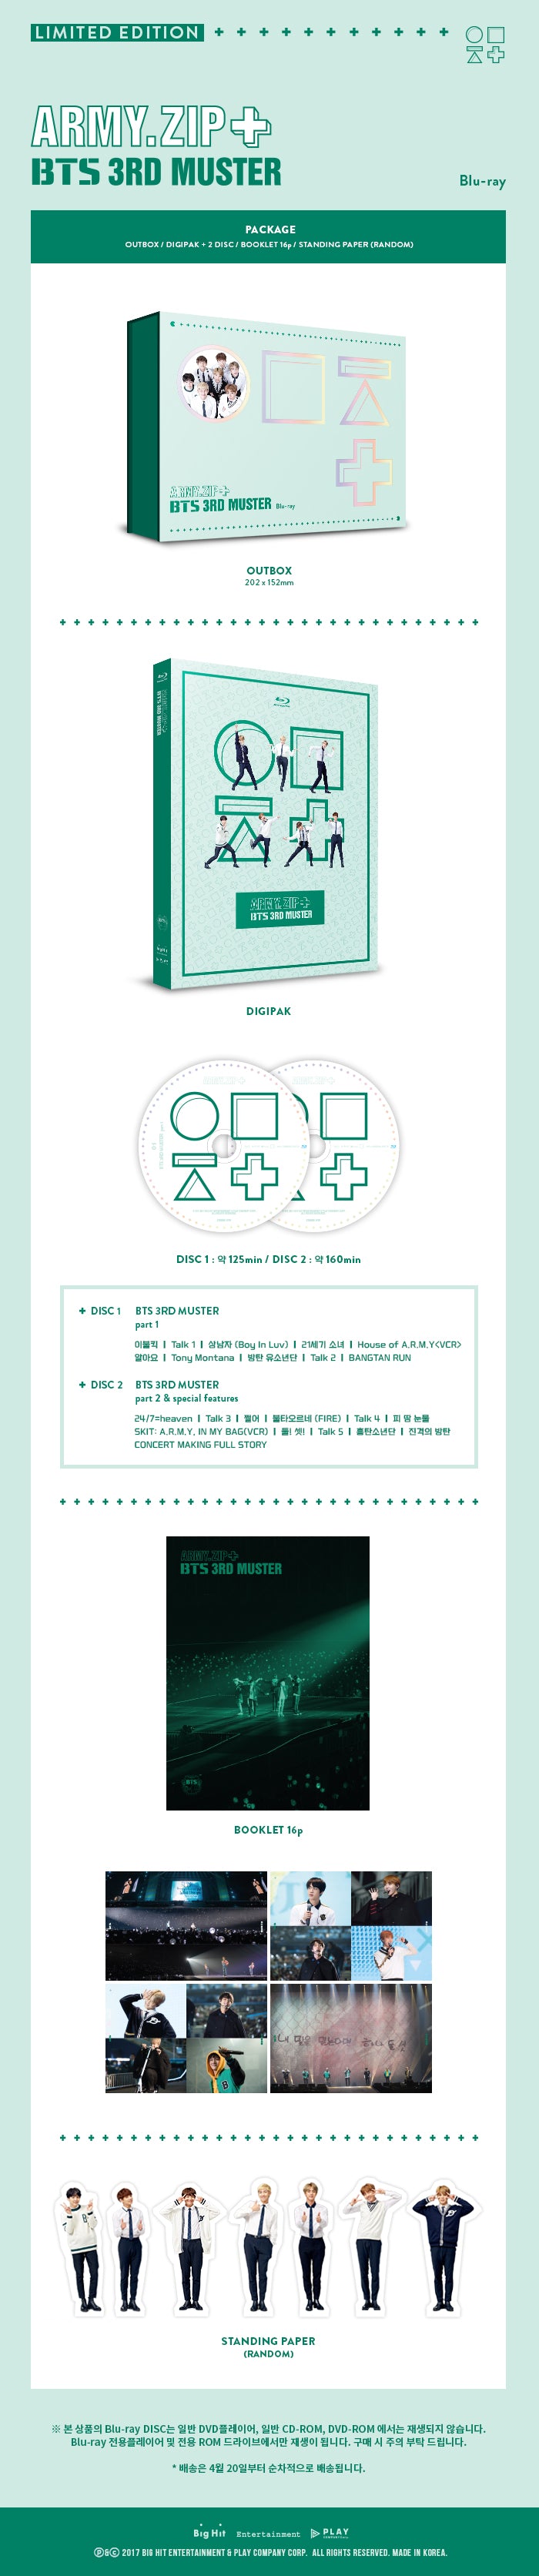 BTS - [ARMY.ZIP+] 3RD MUSTER BLU-RAY (2 DISC)